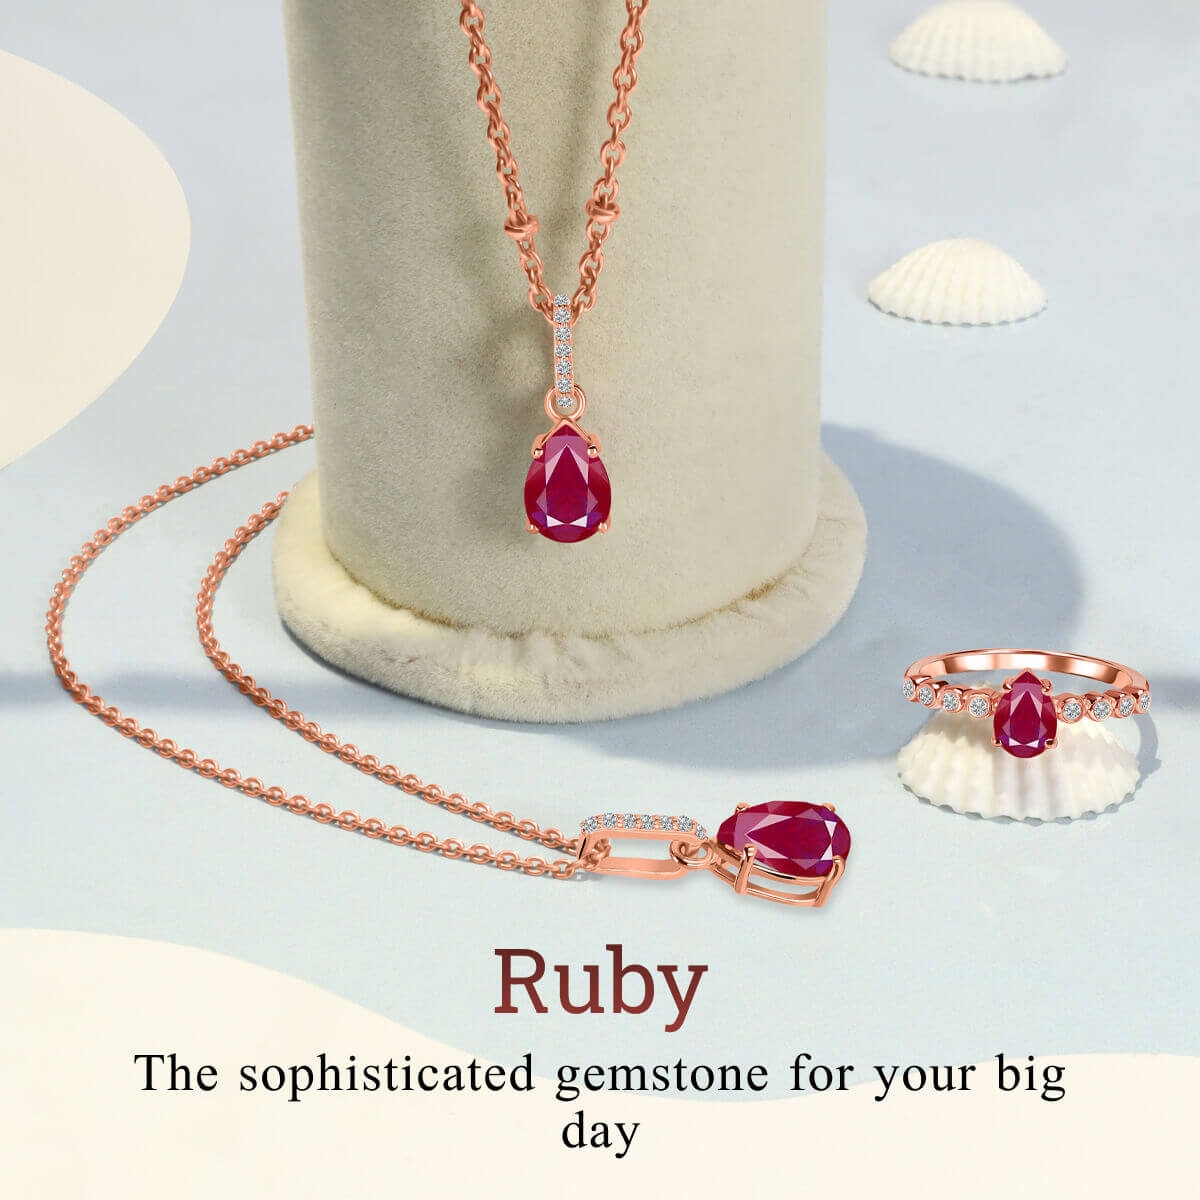 Ruby - The sophisticated gemstone for your big day!